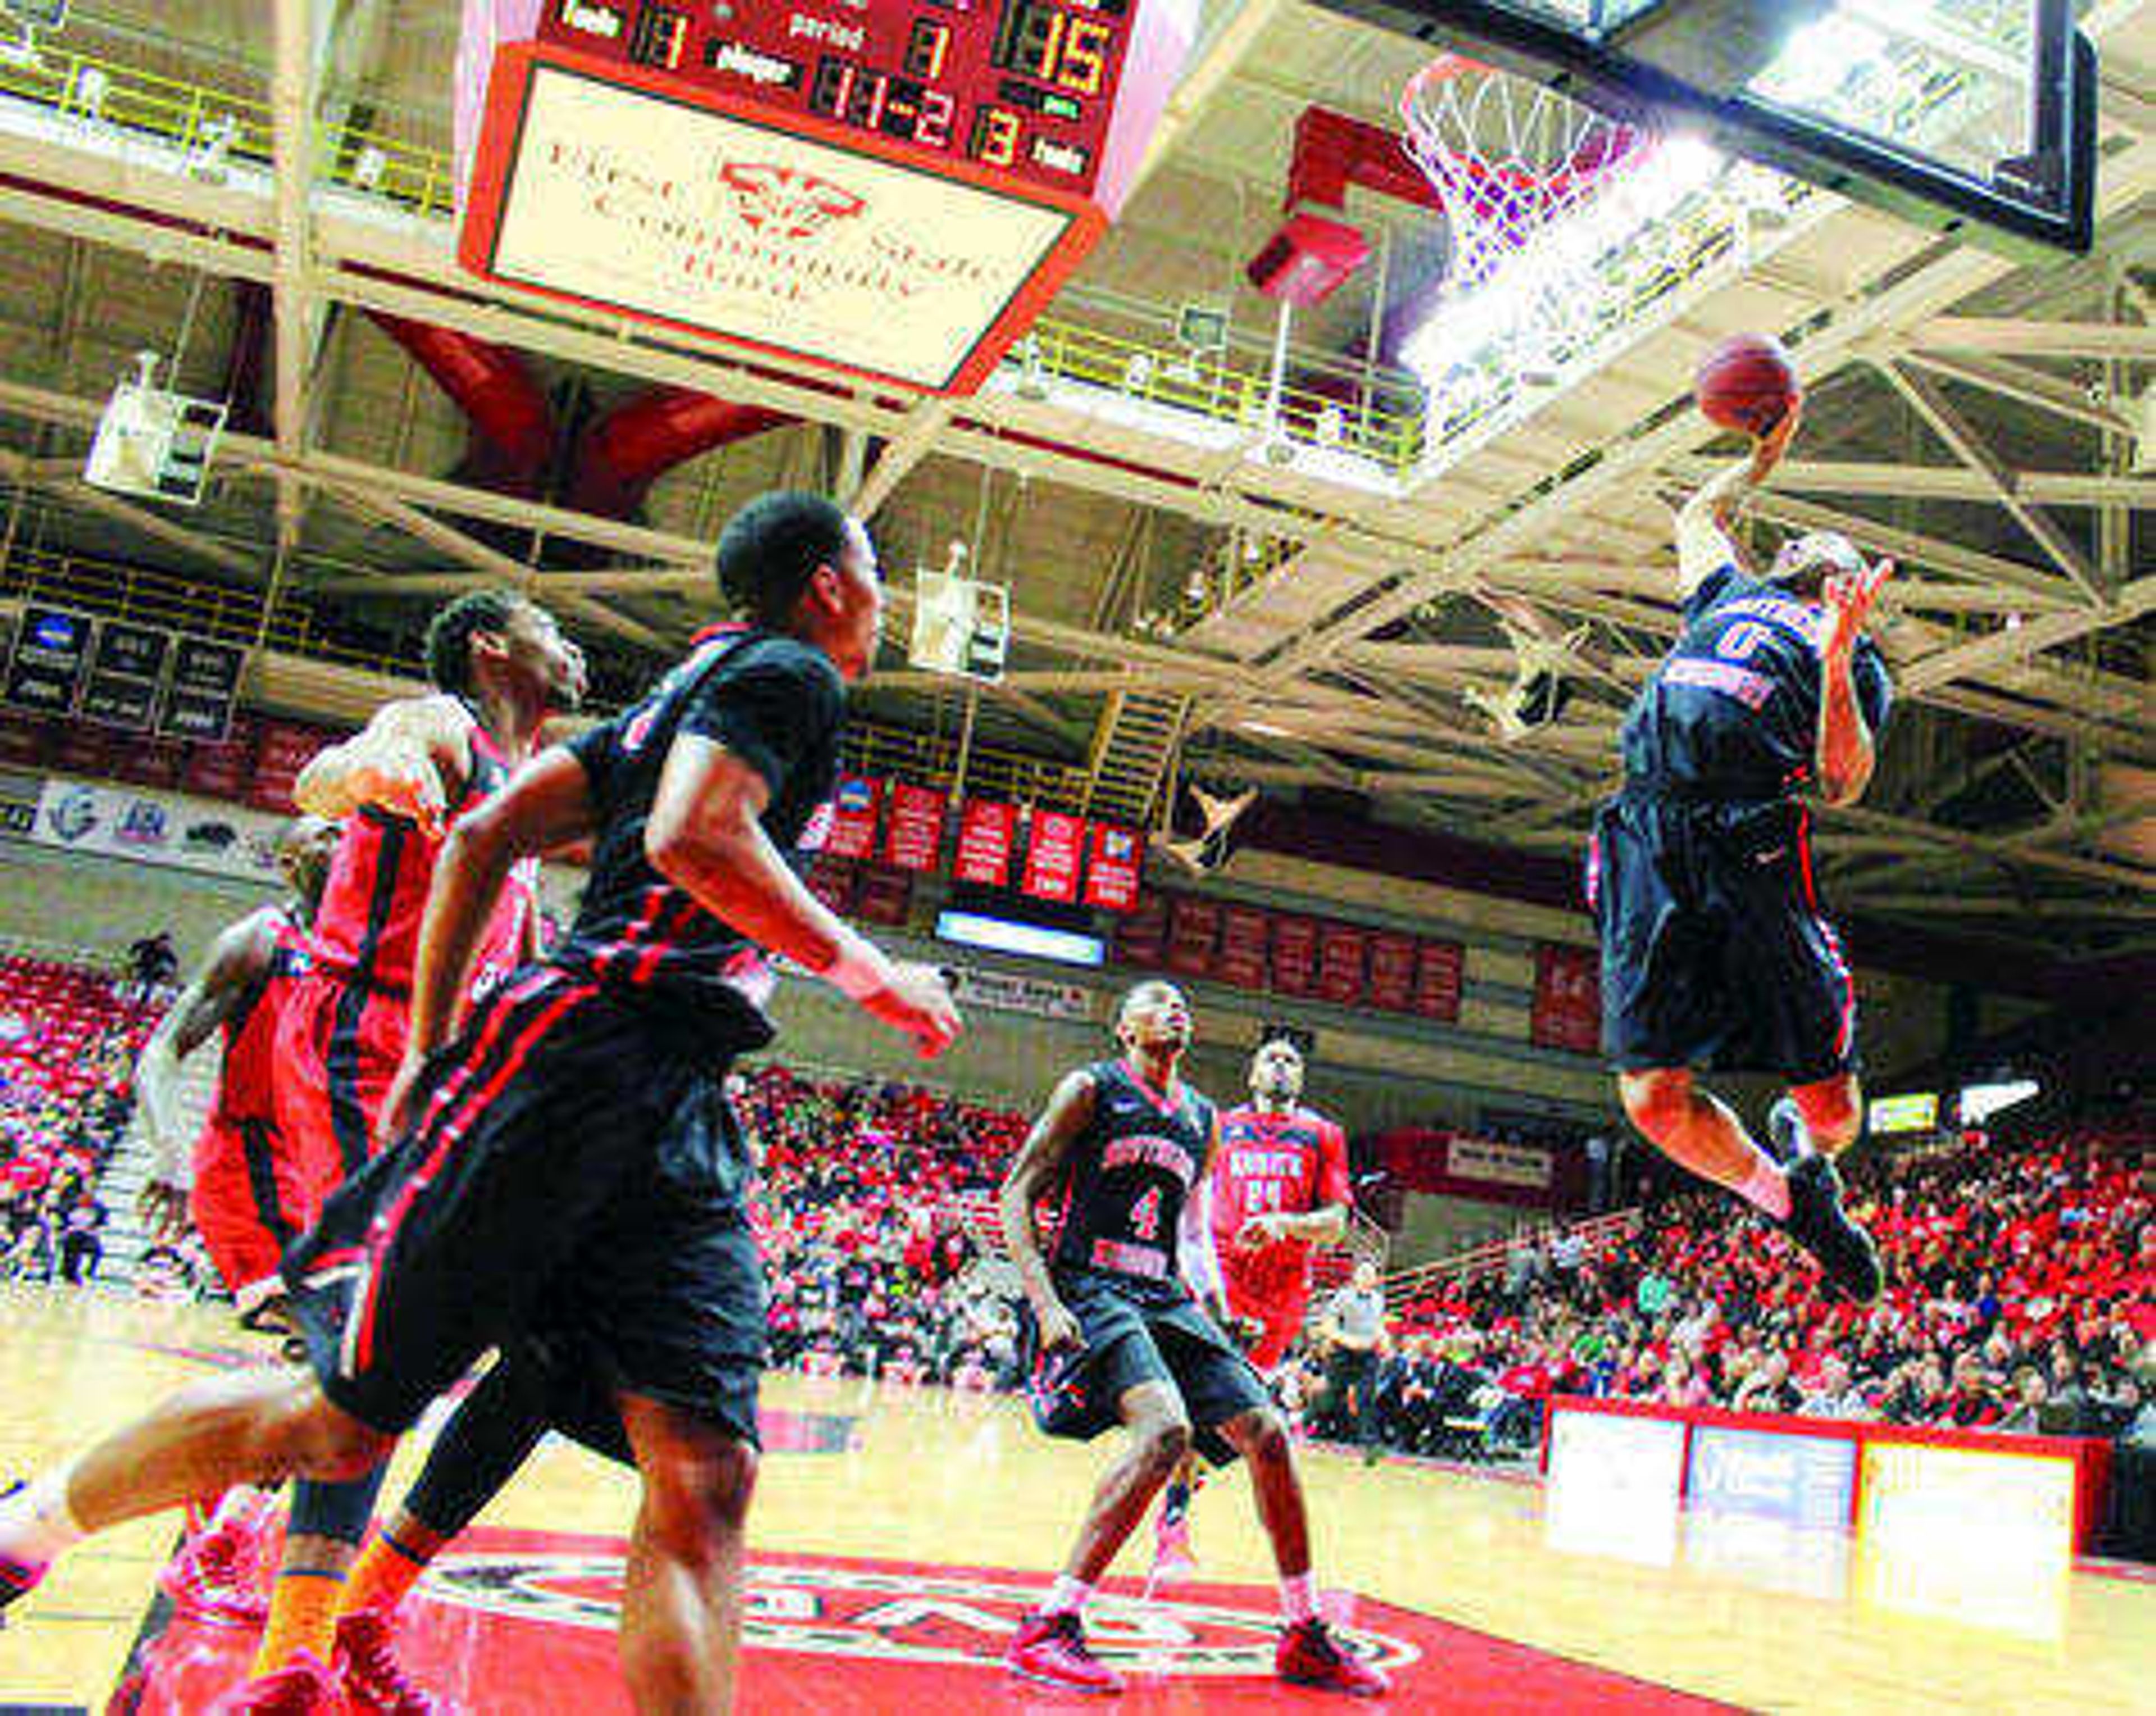 Senior Josh Langford throwing in a one-handed slam against Austin Peay on Senior Night on Feb. 28 in Southeast Missouri State's final home game of the season at Houck Field House. Photo by Doc Fiandaca